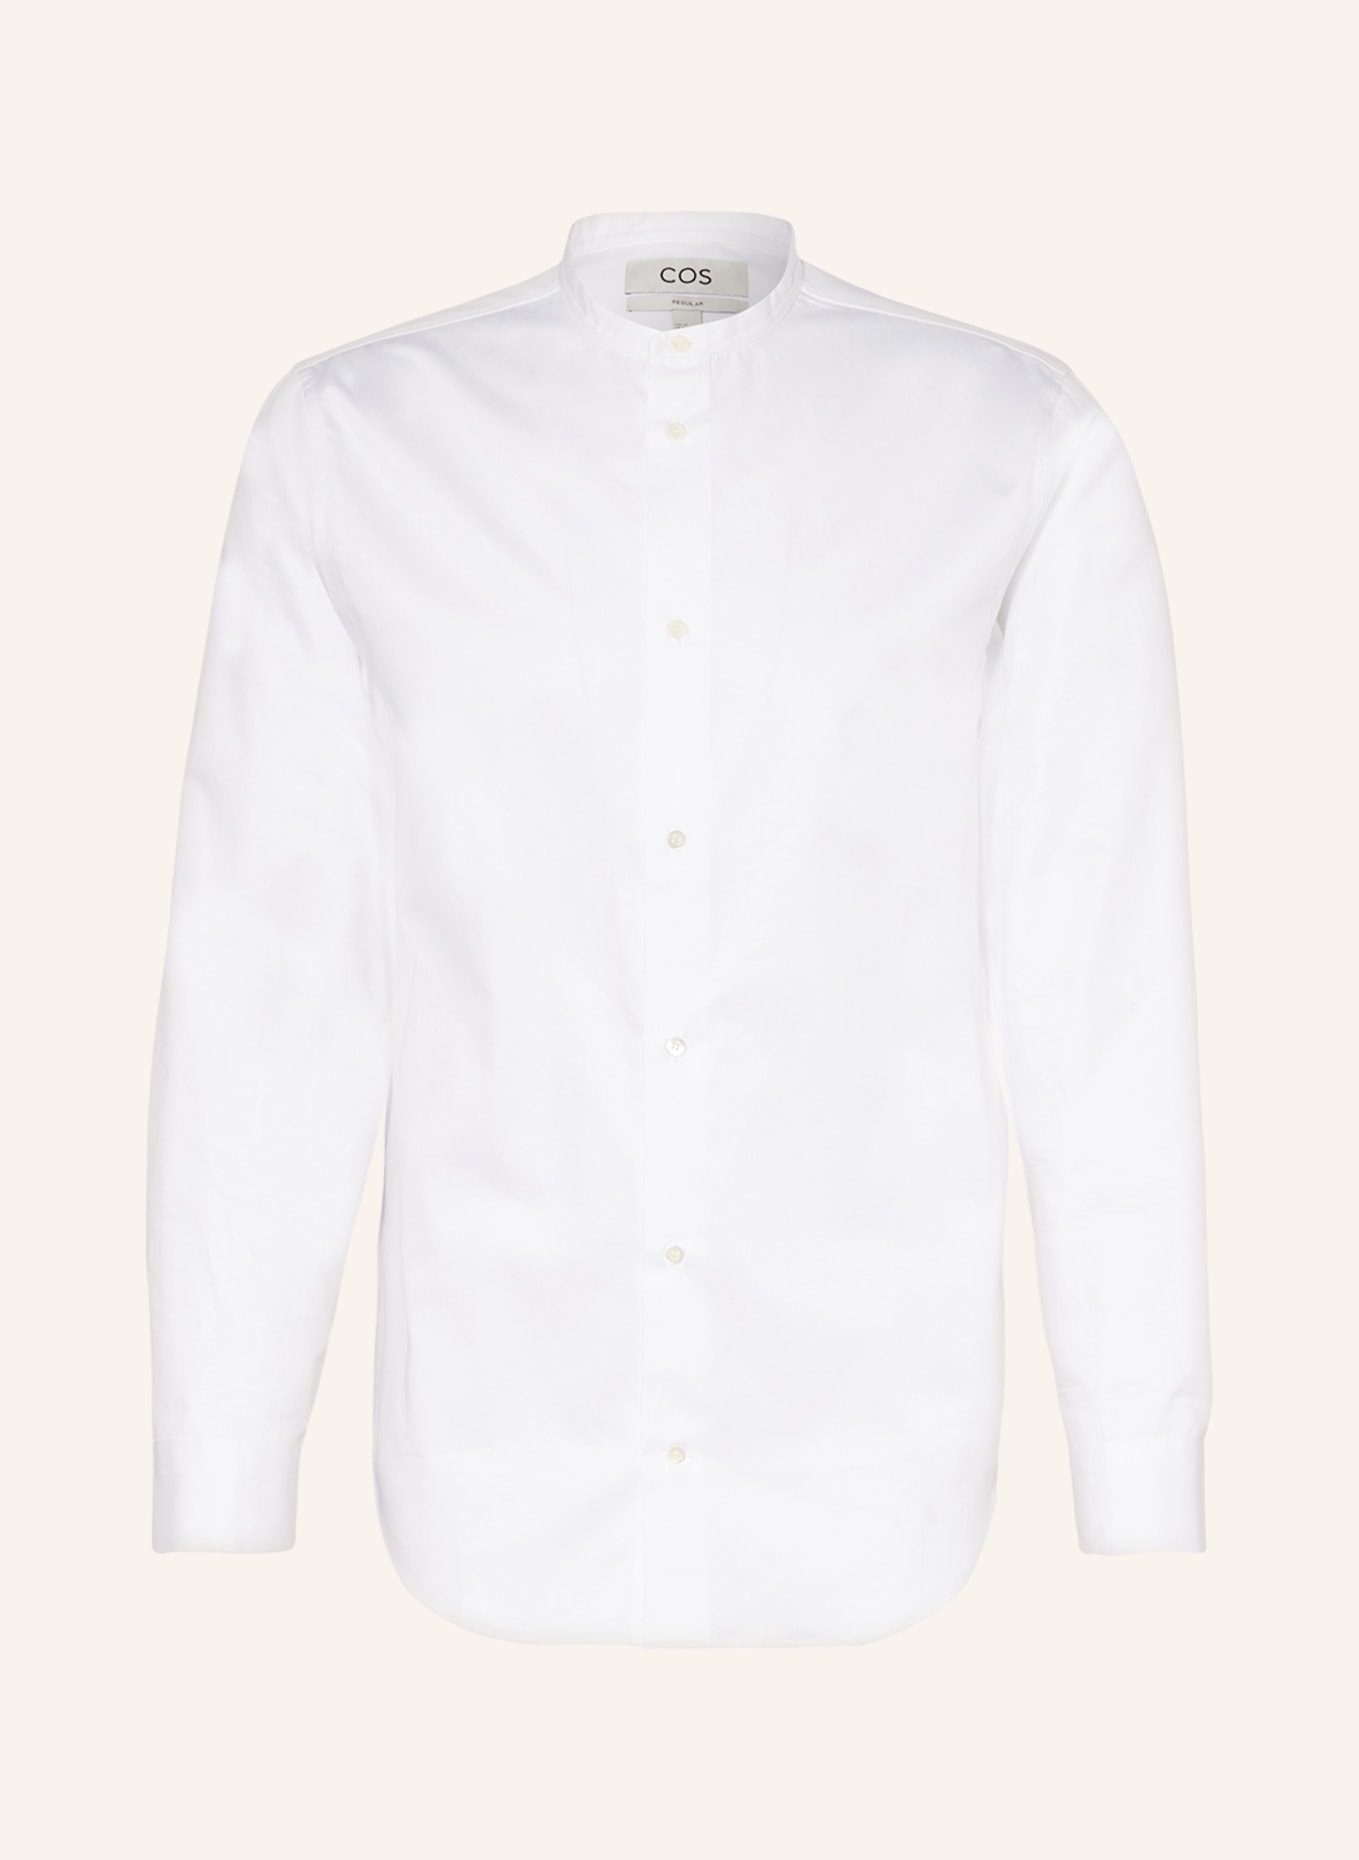 COS Shirt regular fit with stand-up collar, Color: WHITE (Image 1)